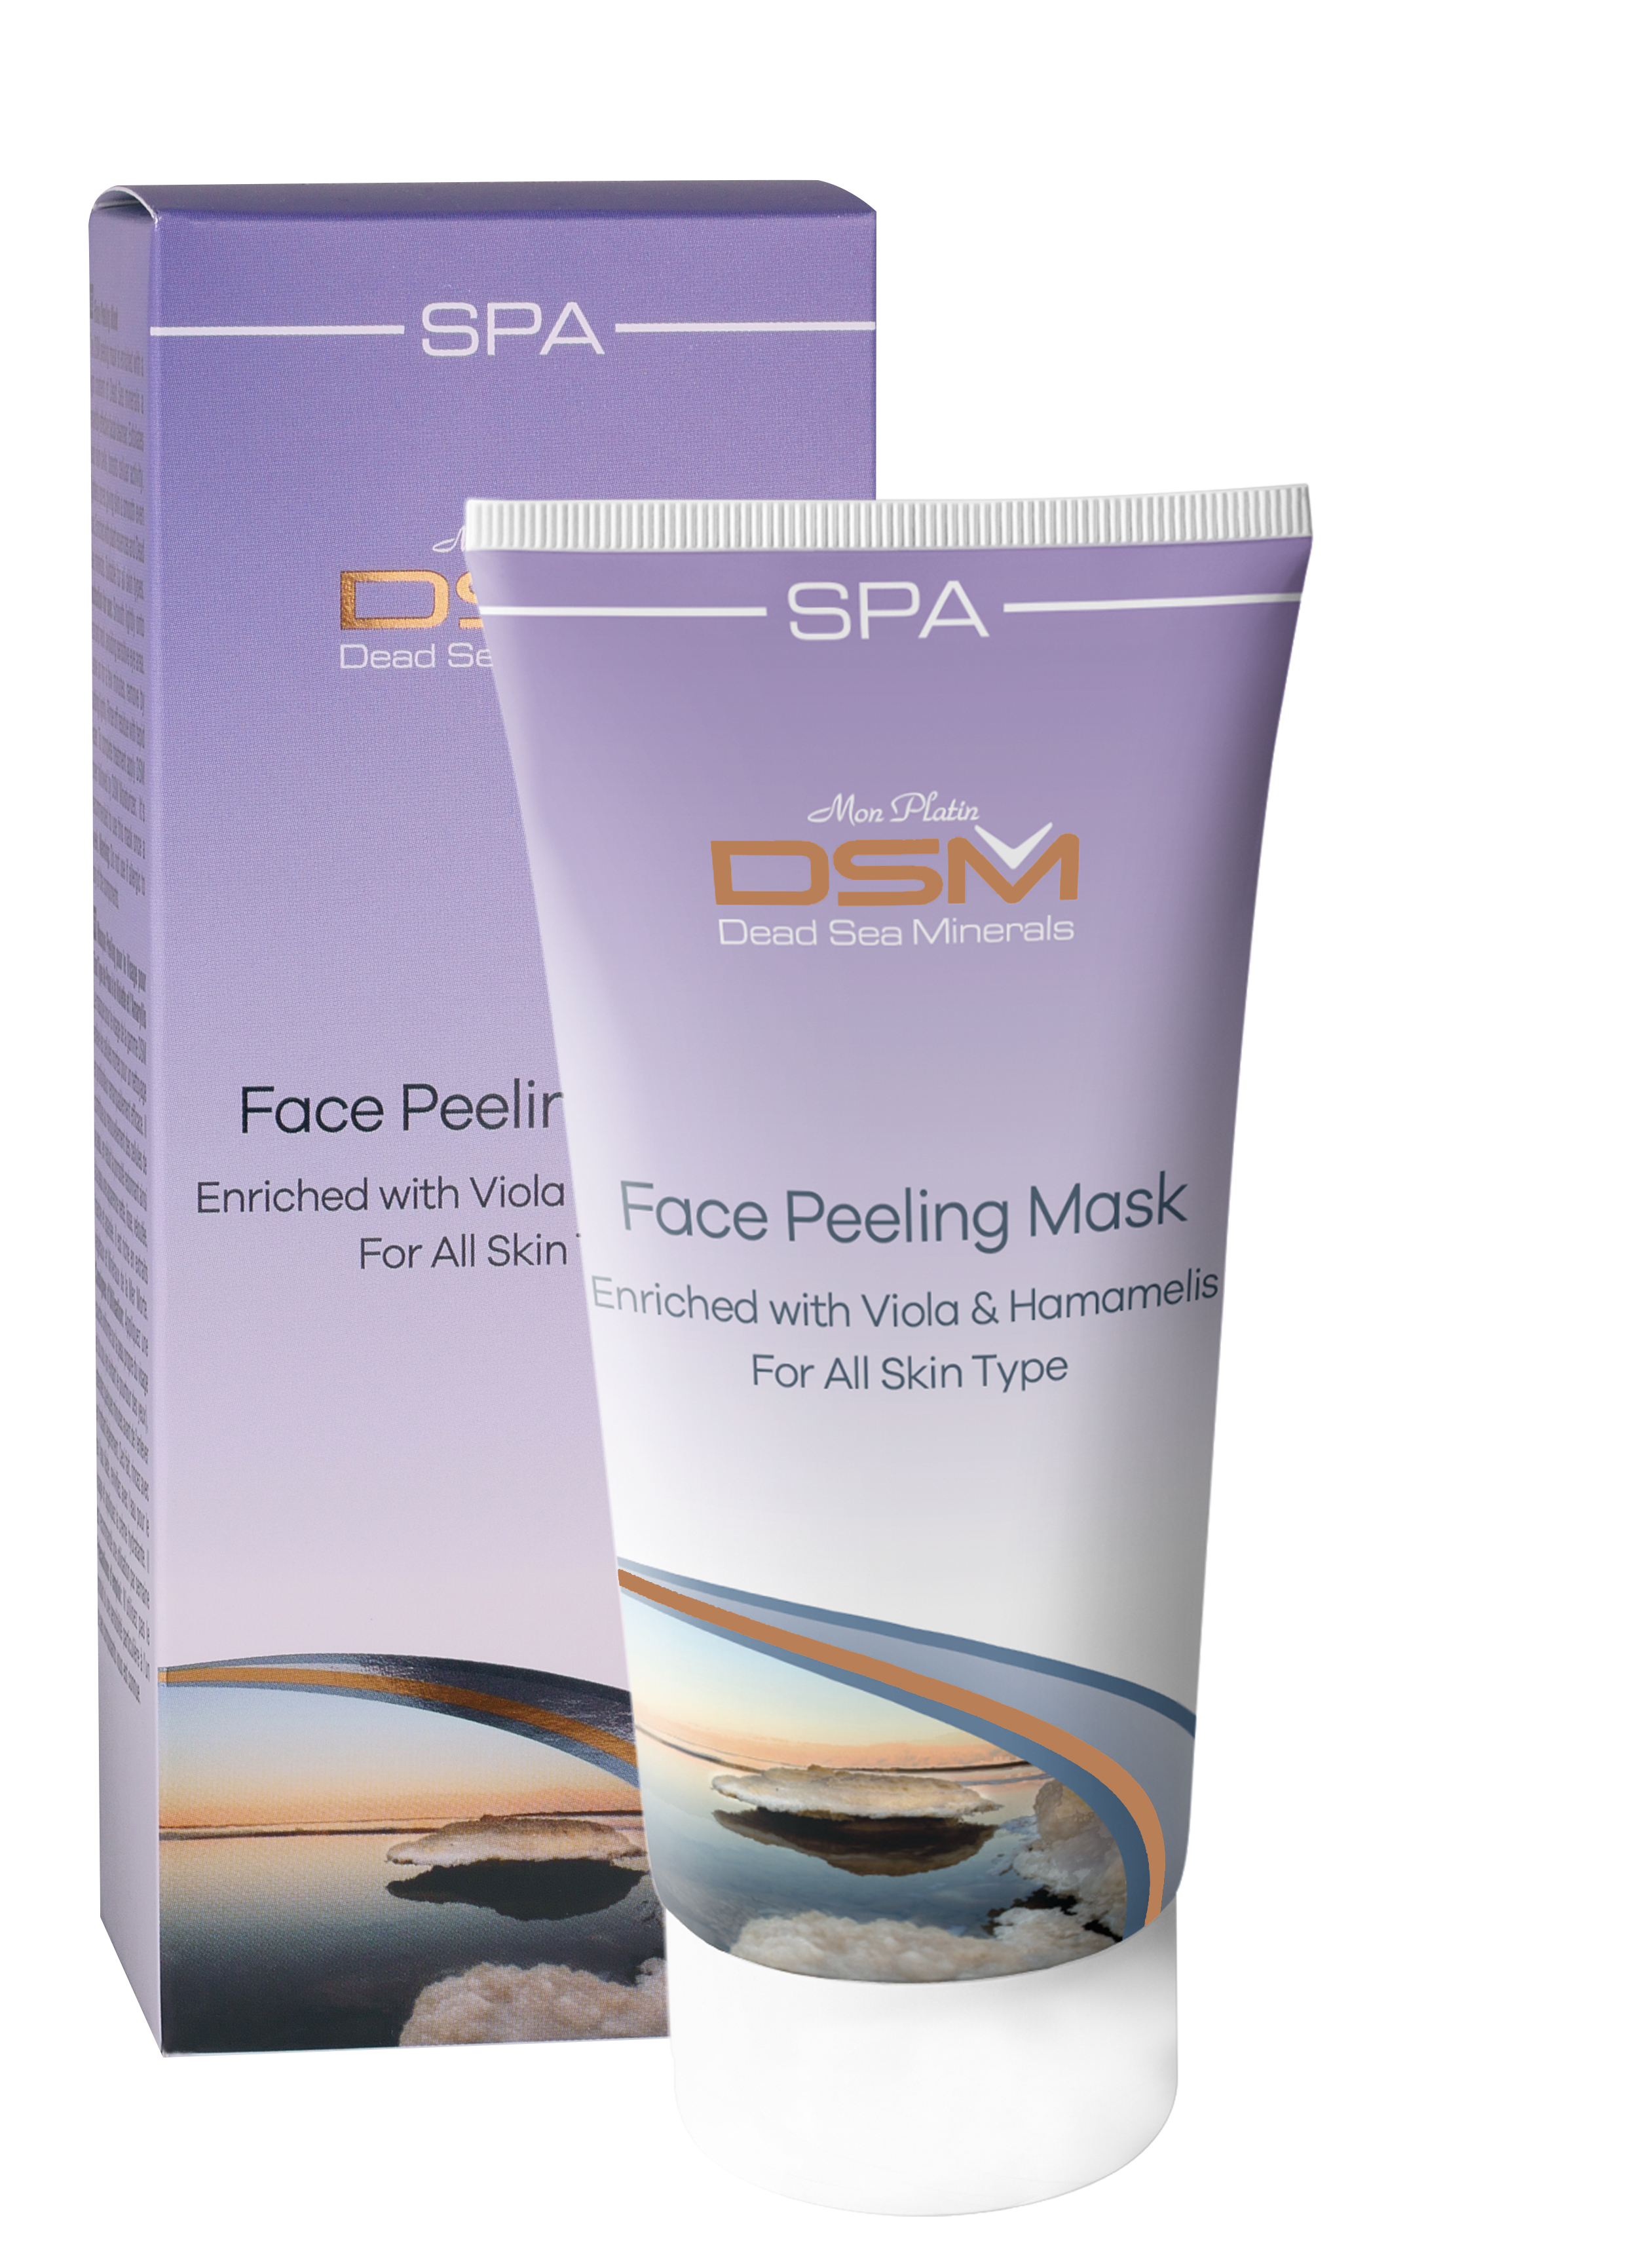 Face Peeling Mask with Viola and Hamamelis